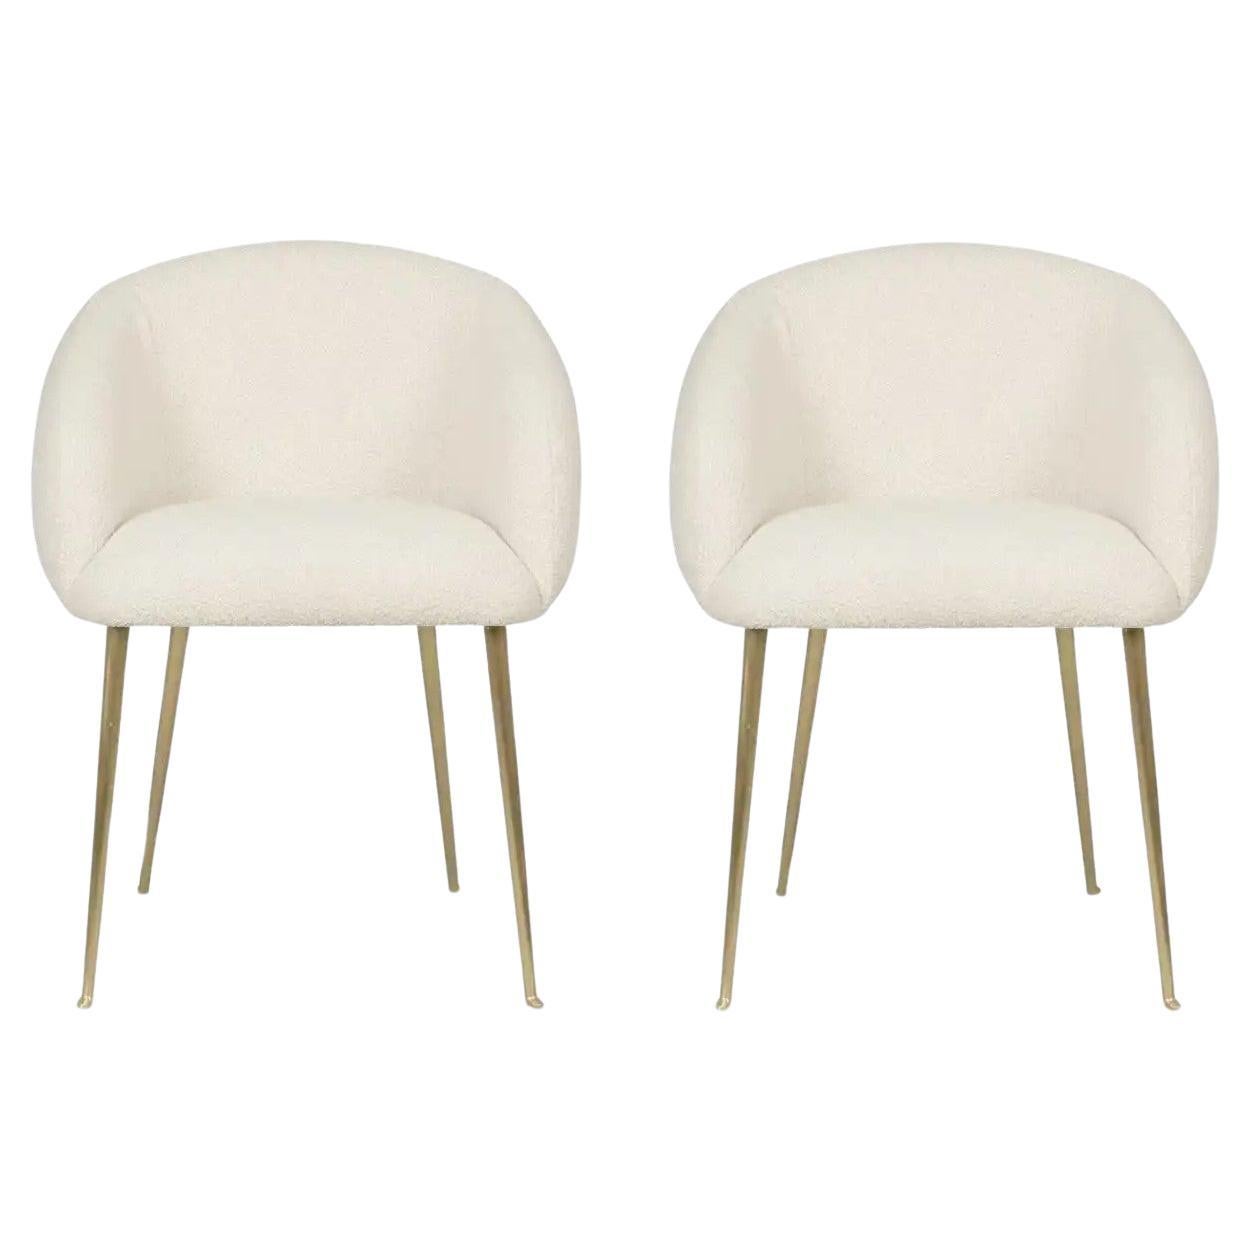 Set Of 2 Upholstered Dining Chairs With Tapered Legs in Brass. For Sale